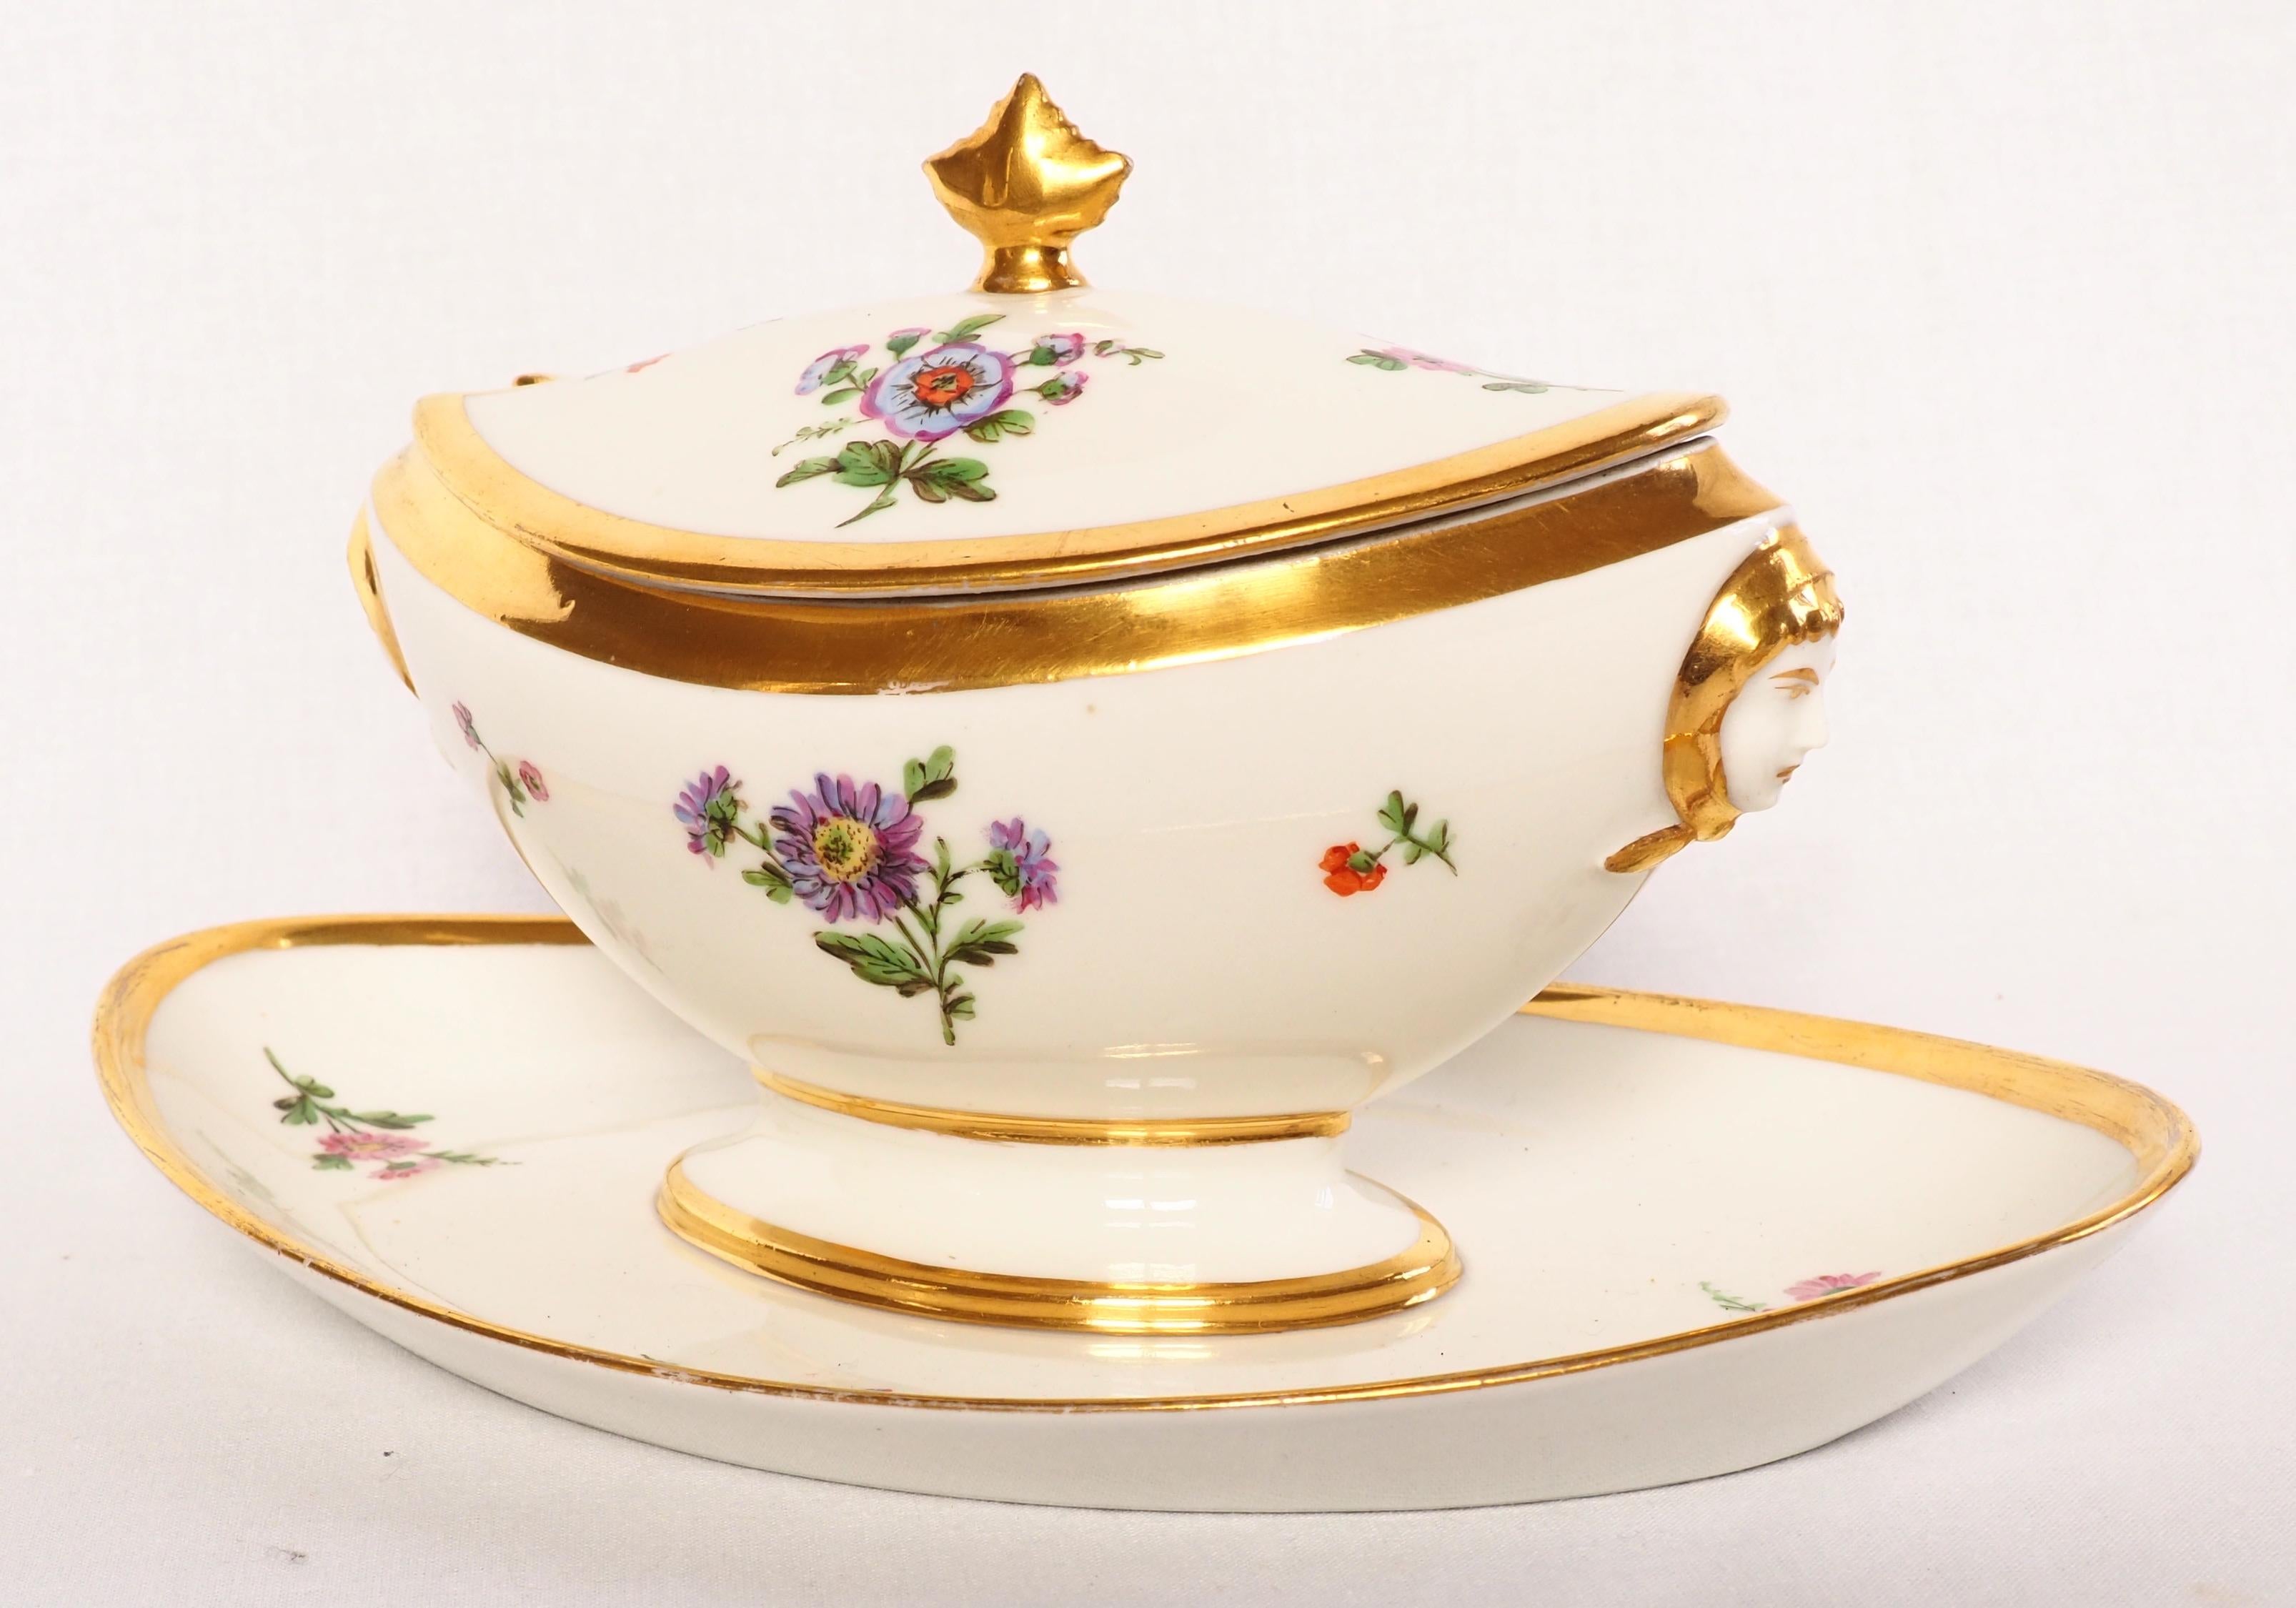 Early 19th Century Schoelcher Manufacture : Empire Paris porcelain sauce boat 19th century - signed For Sale